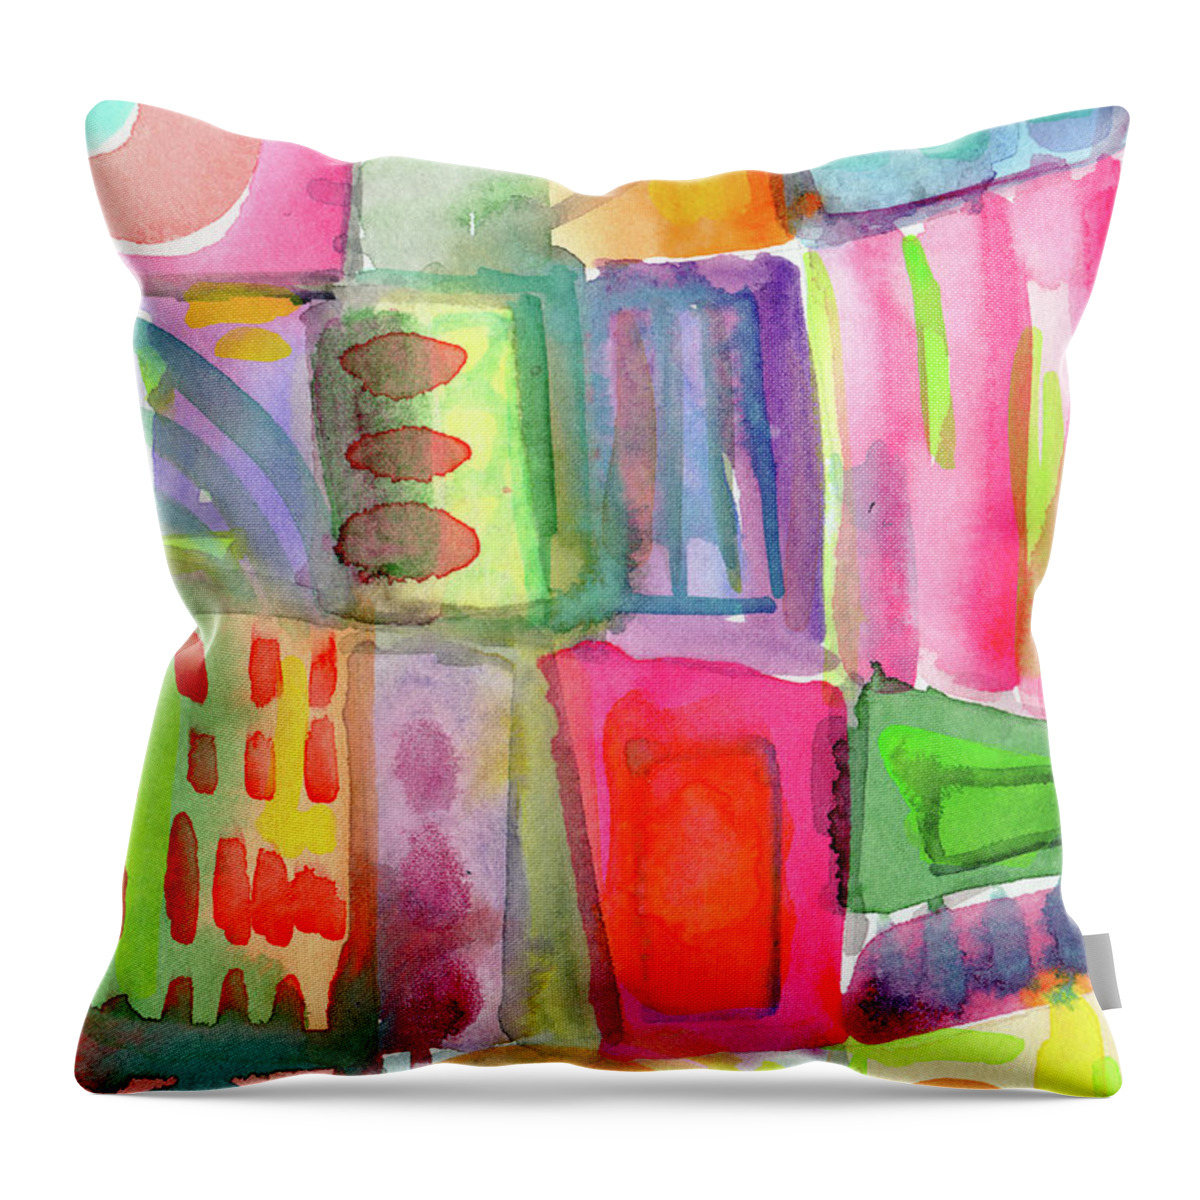 Colorful Throw Pillow featuring the painting Colorful Patchwork 2- Art by Linda Woods by Linda Woods